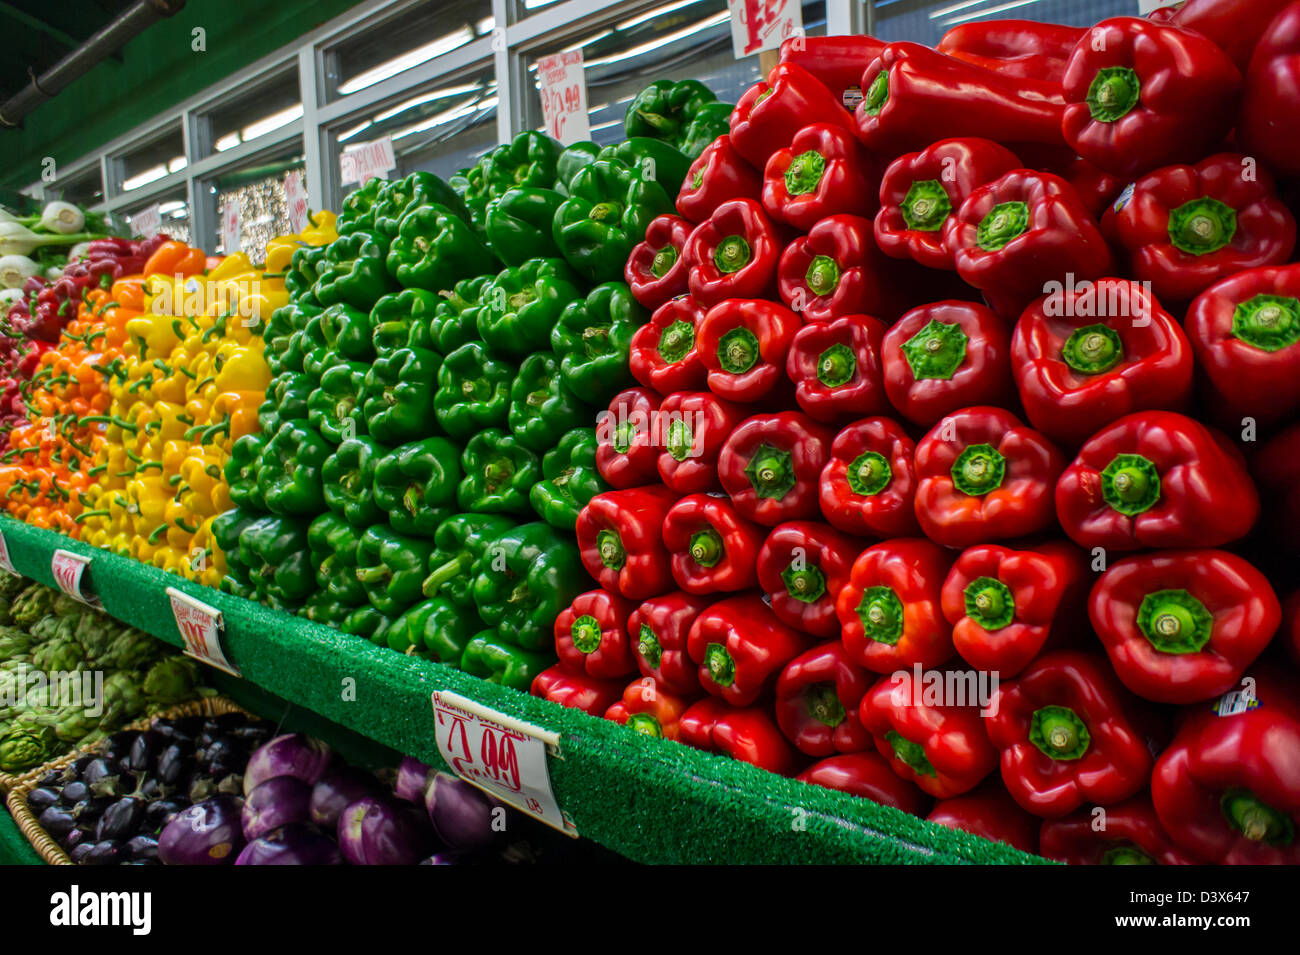 Red, green, yellow and orange peppers and other vegetables are seen on sale in a grocery store in New York Stock Photo